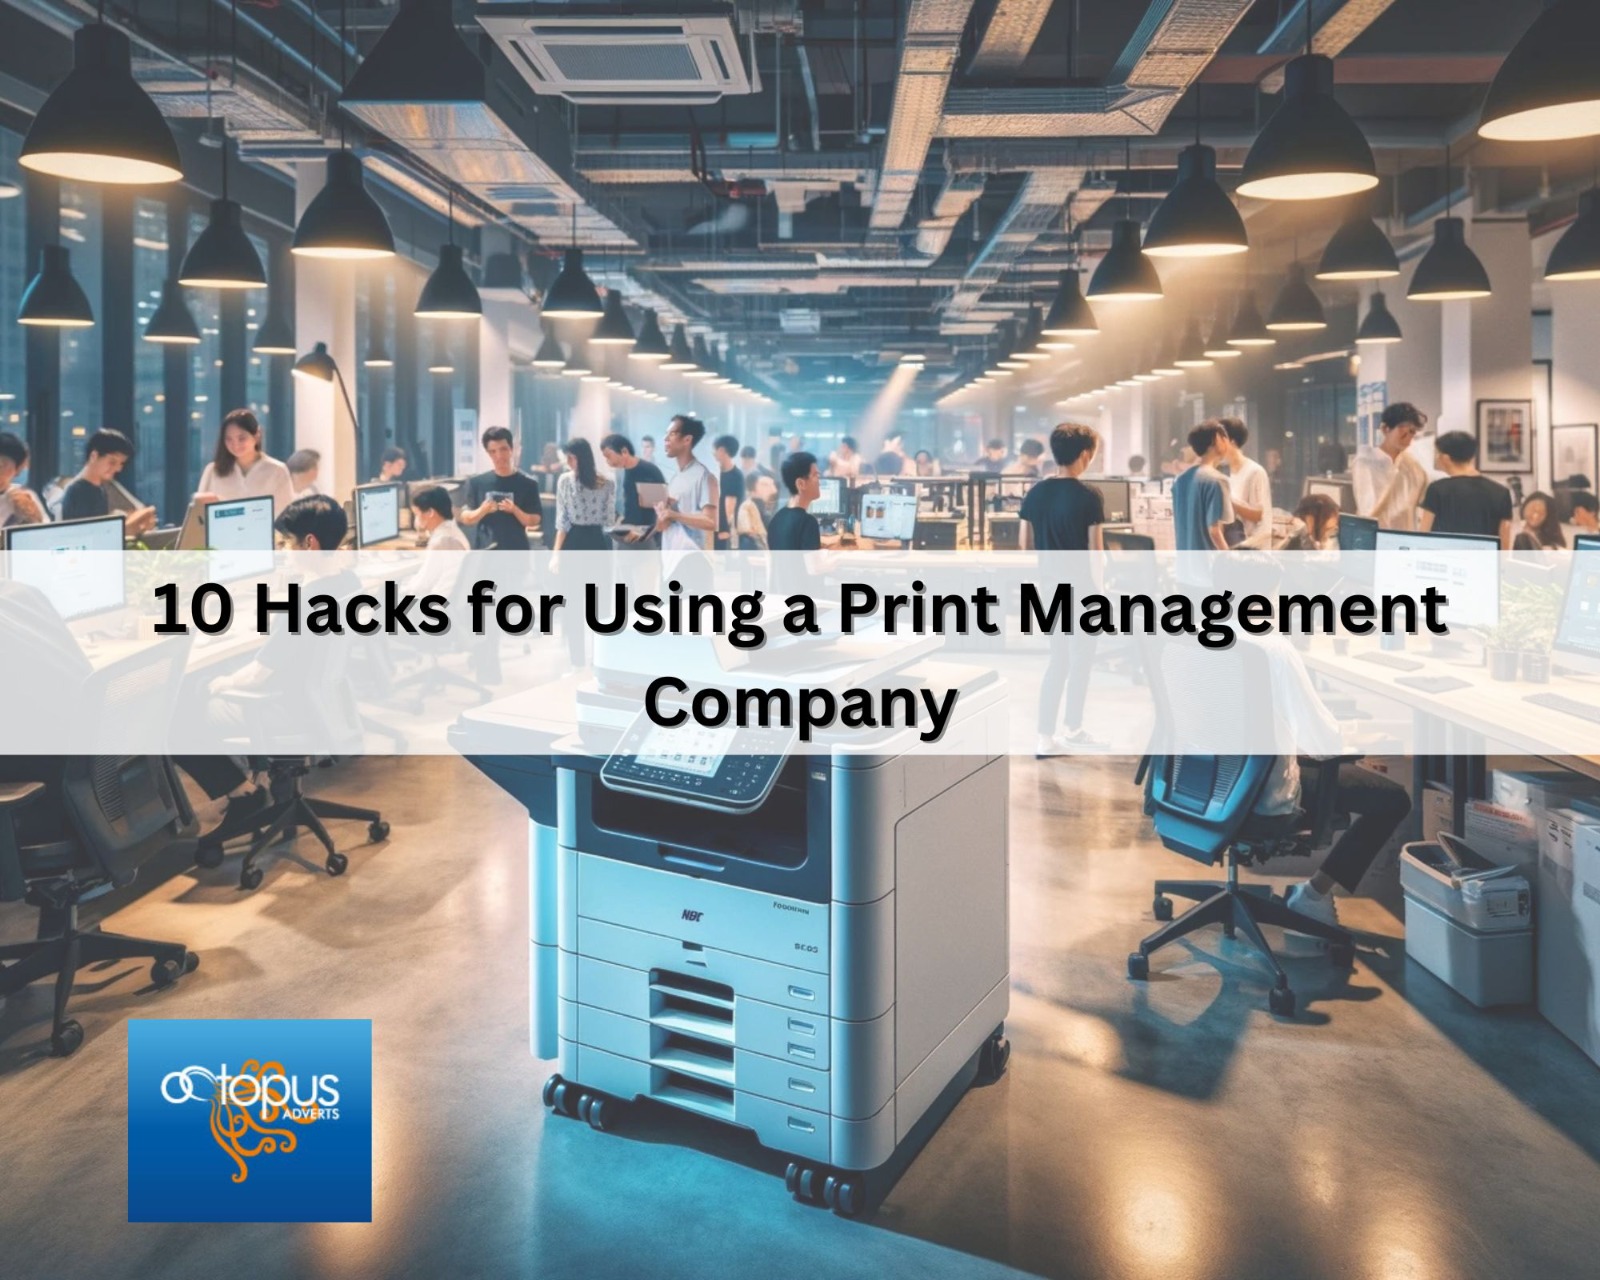 10 Hacks for Using a Print Management Company